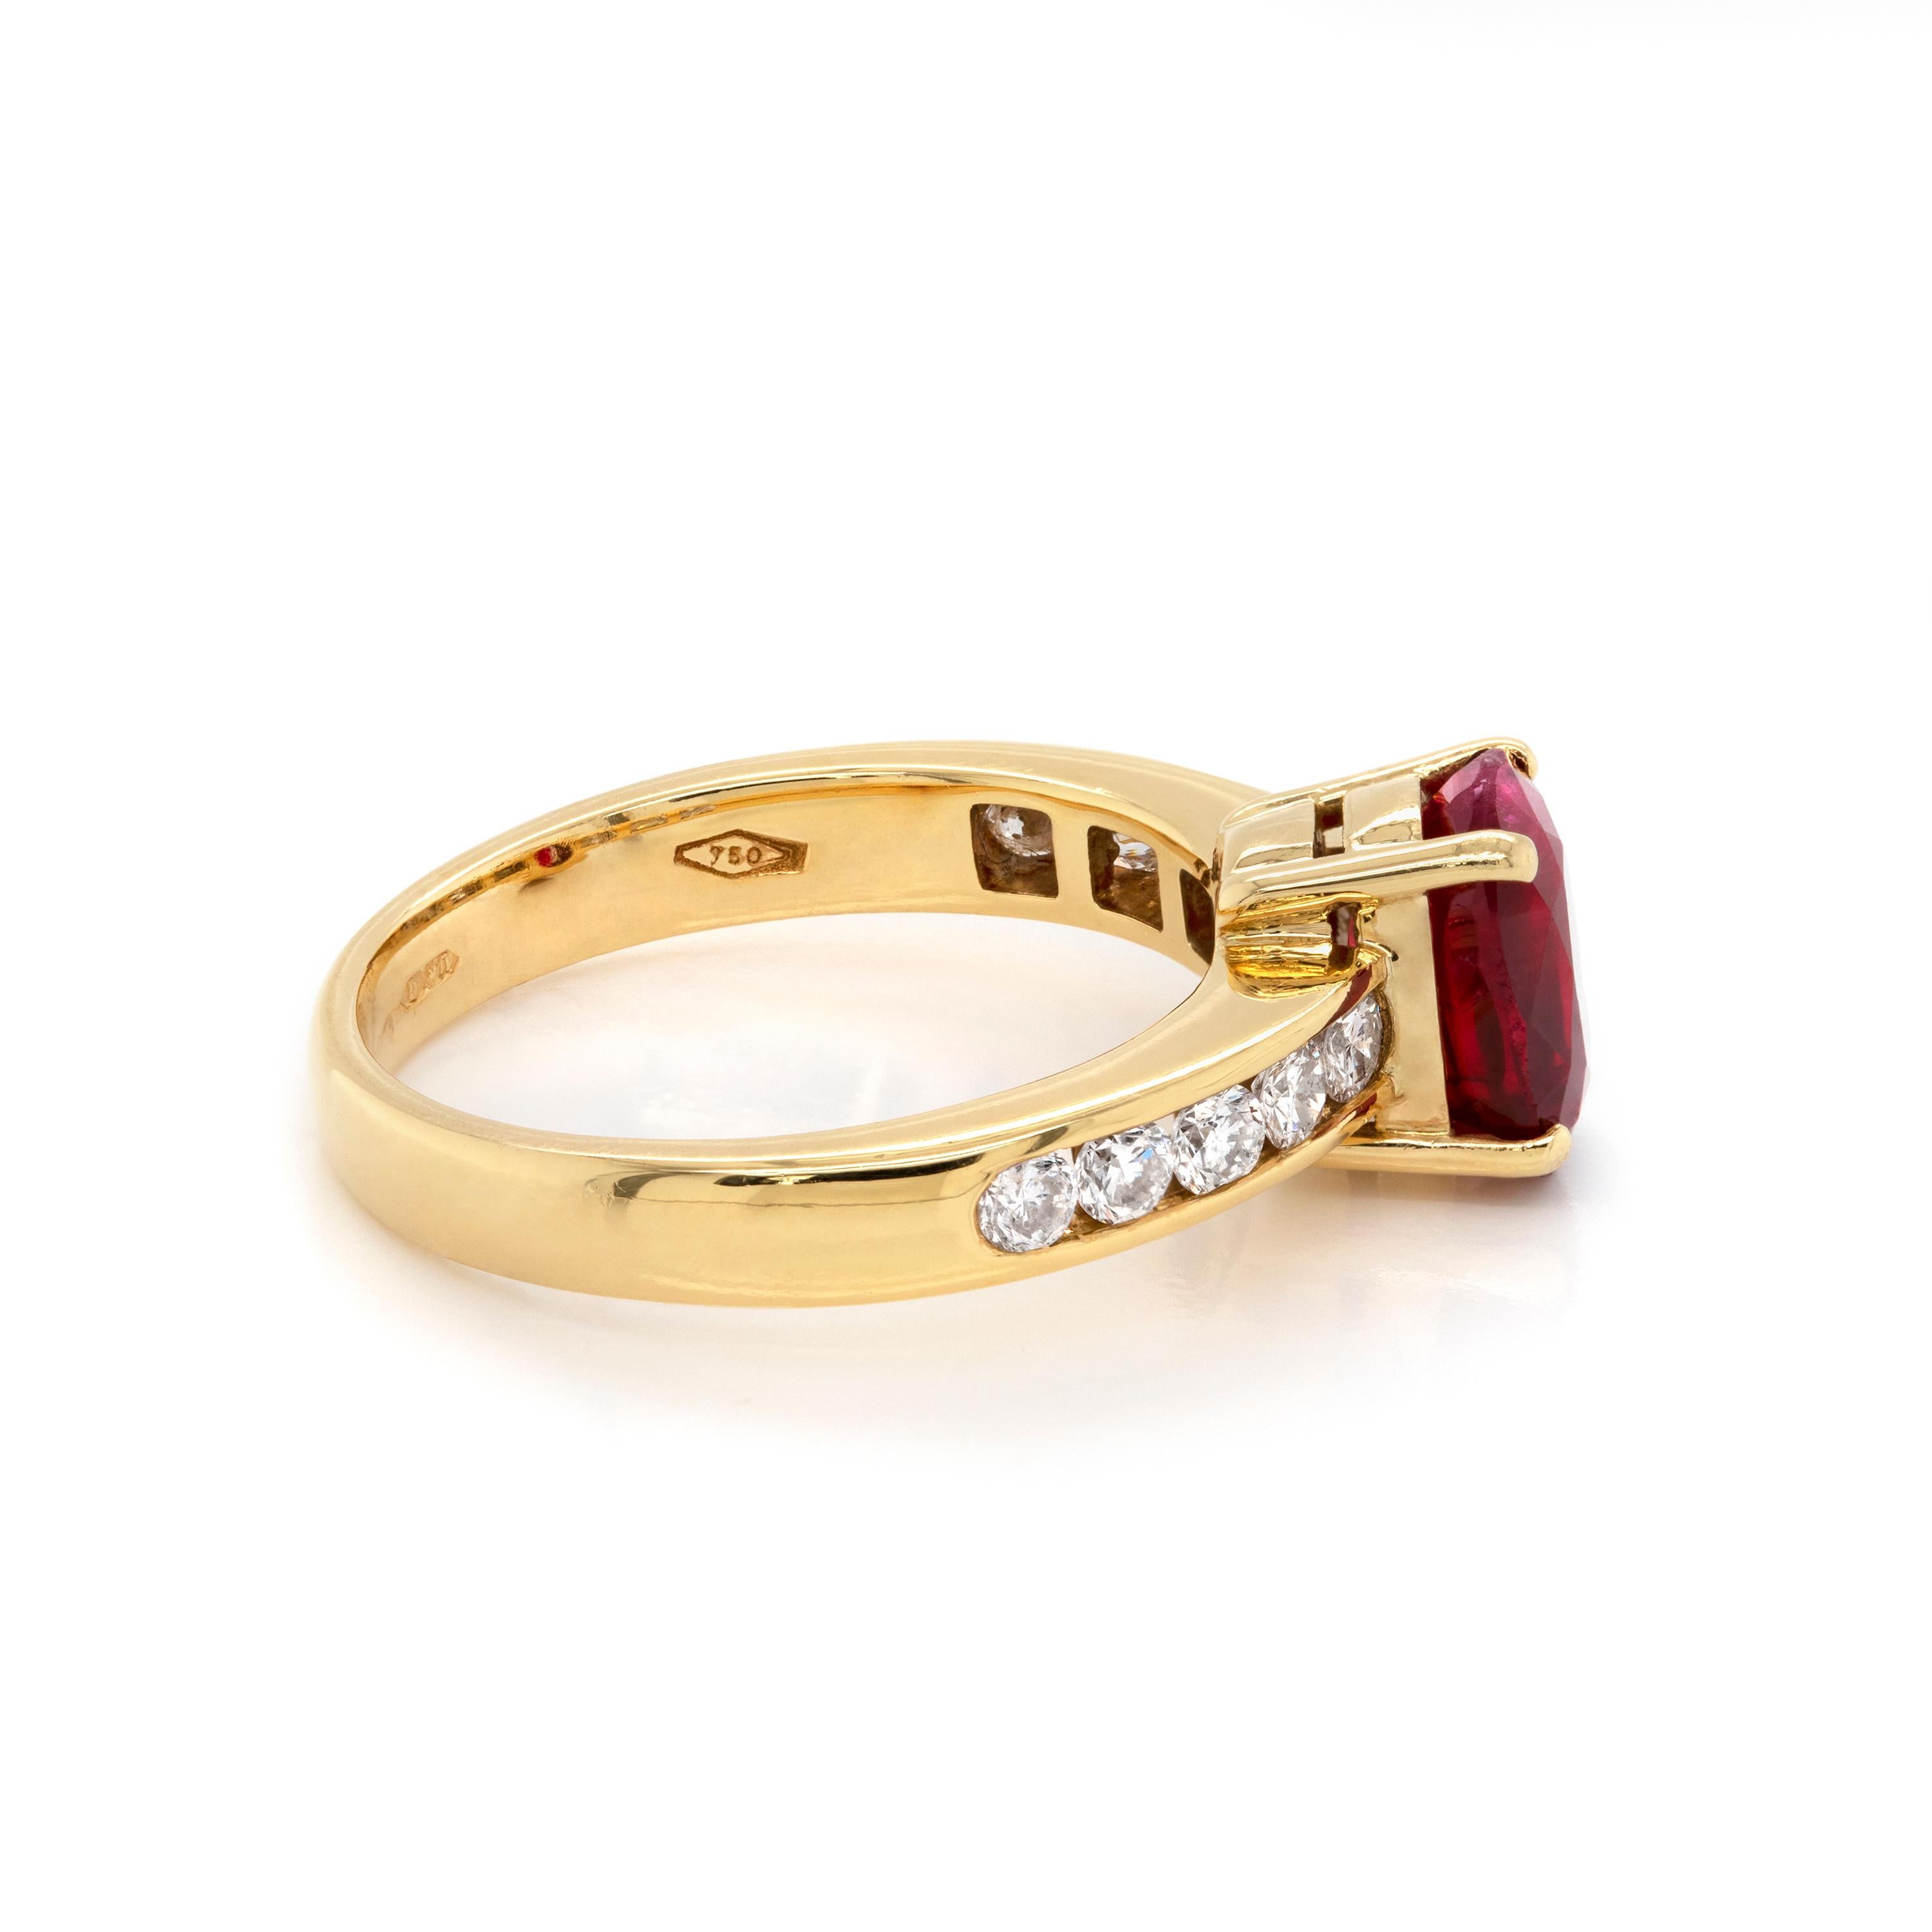 This 18 carat gold engagement ring features a wonderful 2.15ct lively red oval ruby in the centre, mounted in an open back, four claw setting. The ruby is accompanied by five channel set round brilliant cut diamonds on either side, weighing an